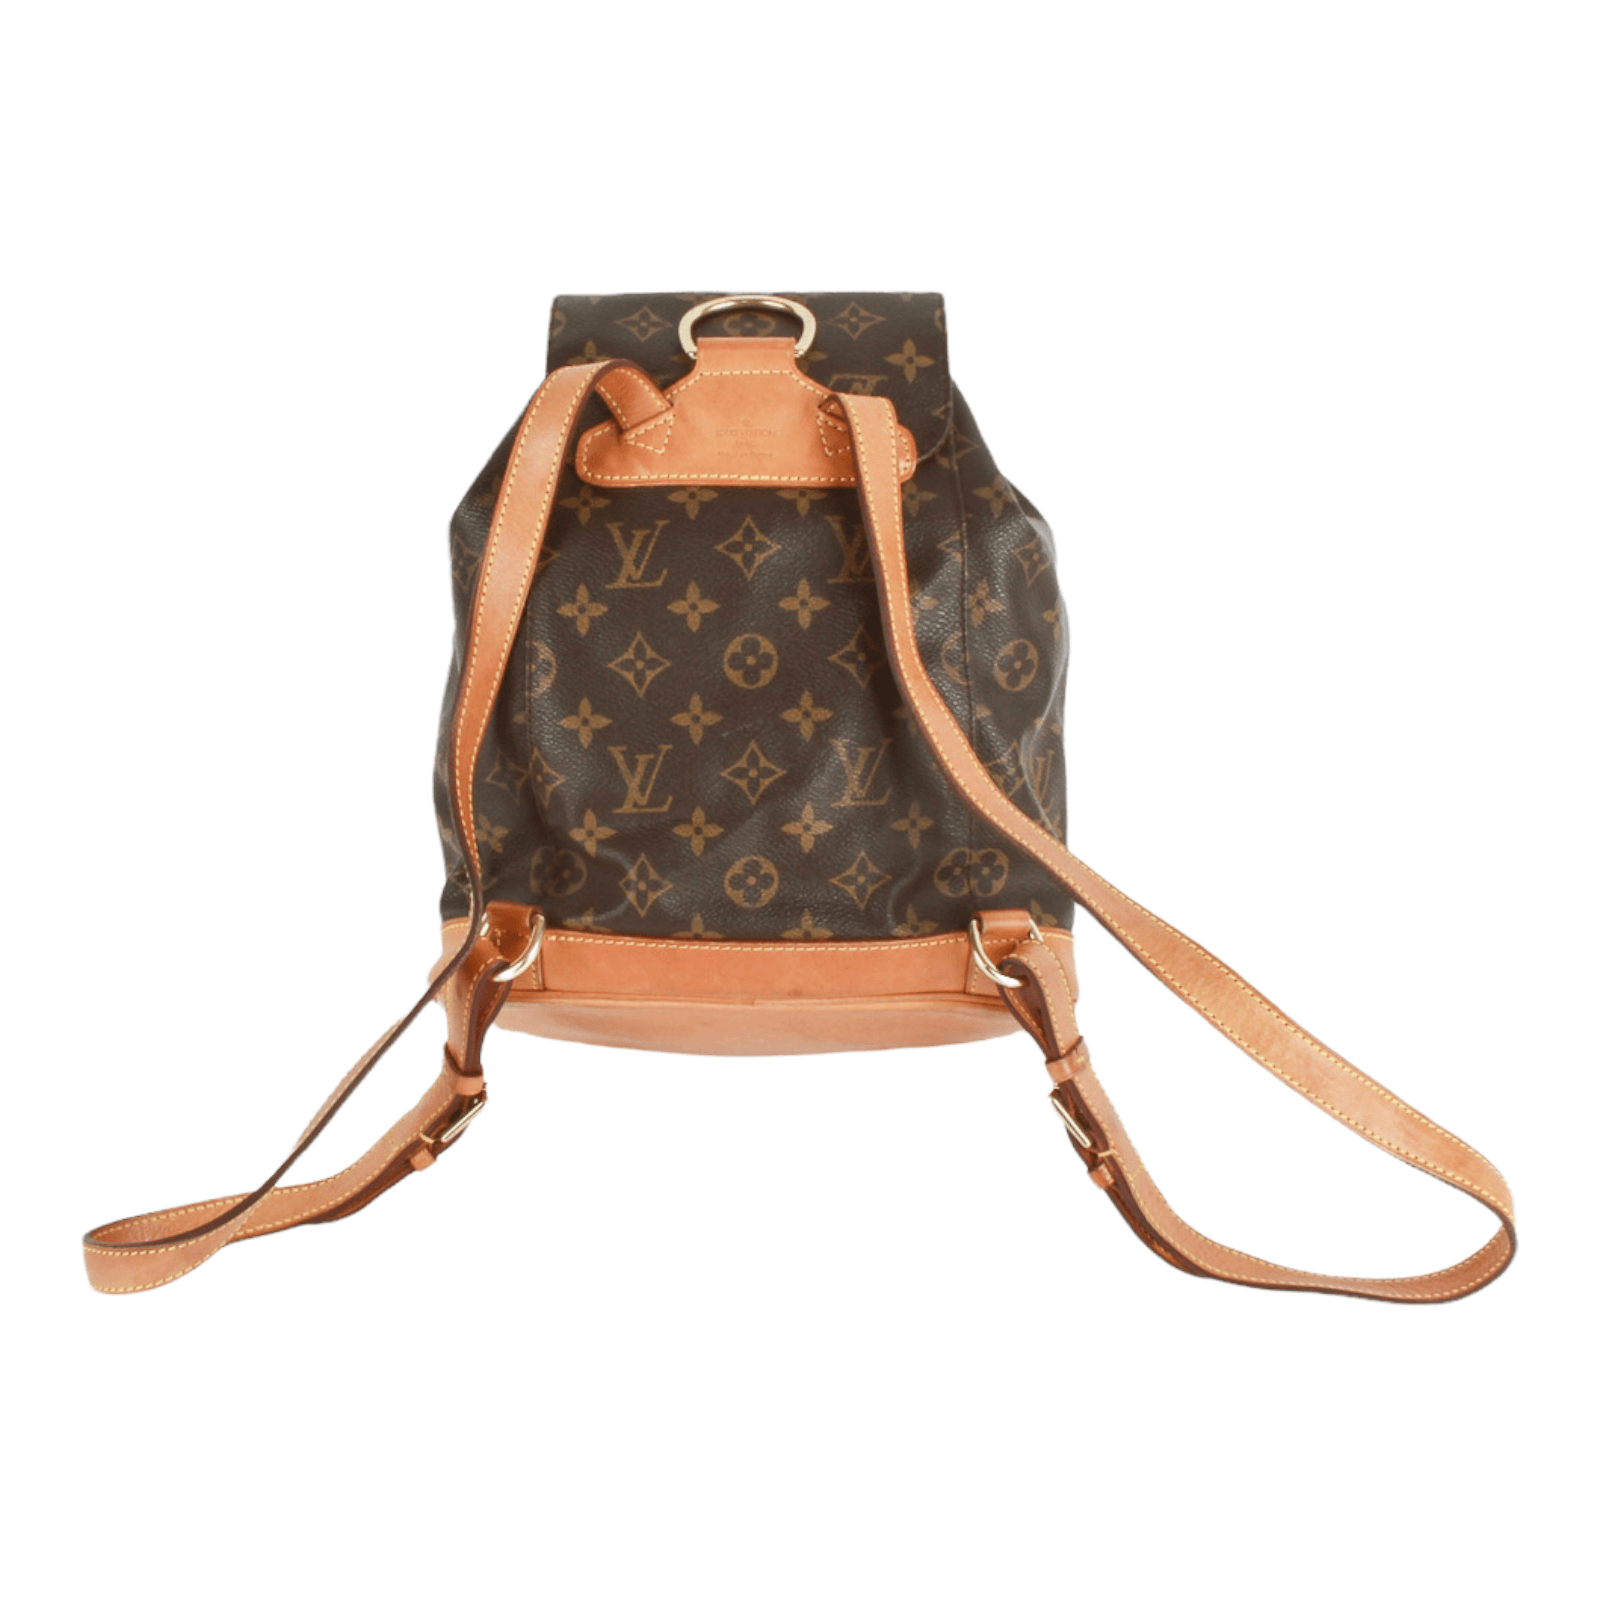 Monogram Montsouris Mm Backpack (Authentic Pre-Owned)